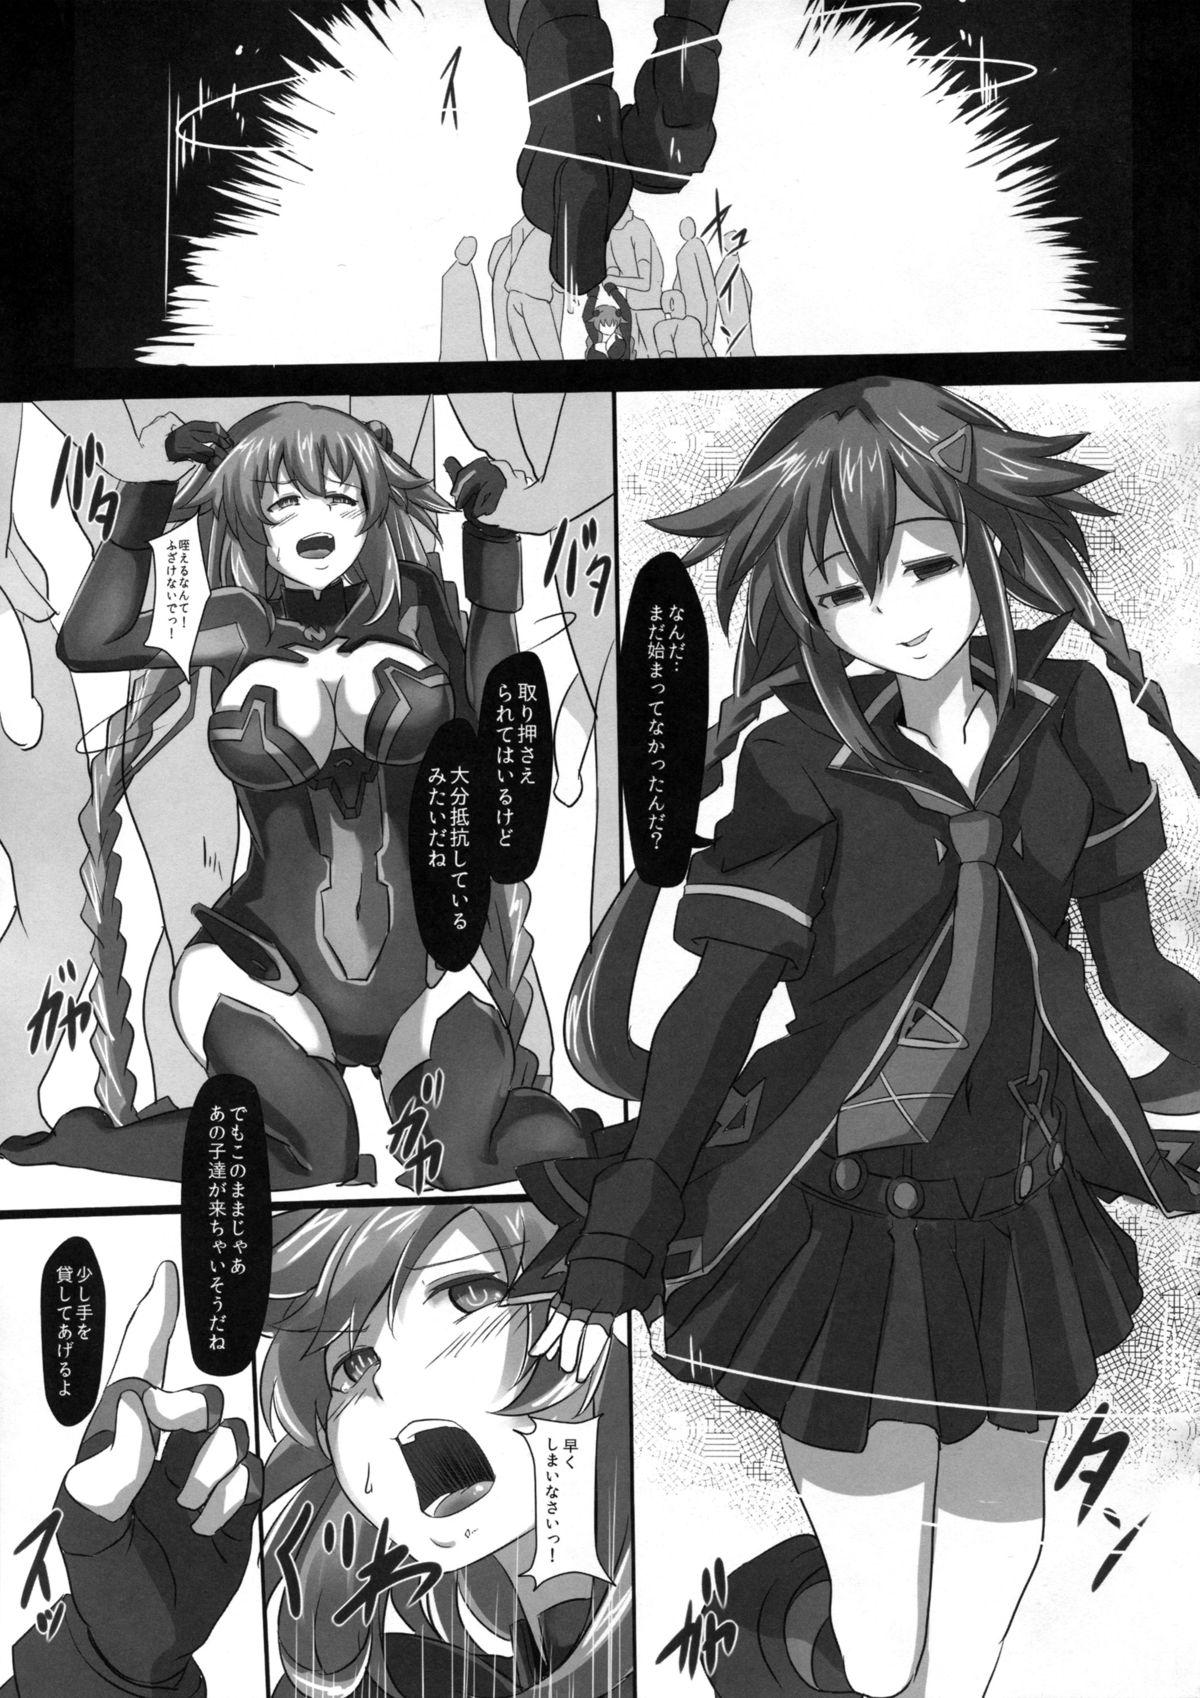 Glamour Nightmare of goddess - Hyperdimension neptunia Cougars - Page 4